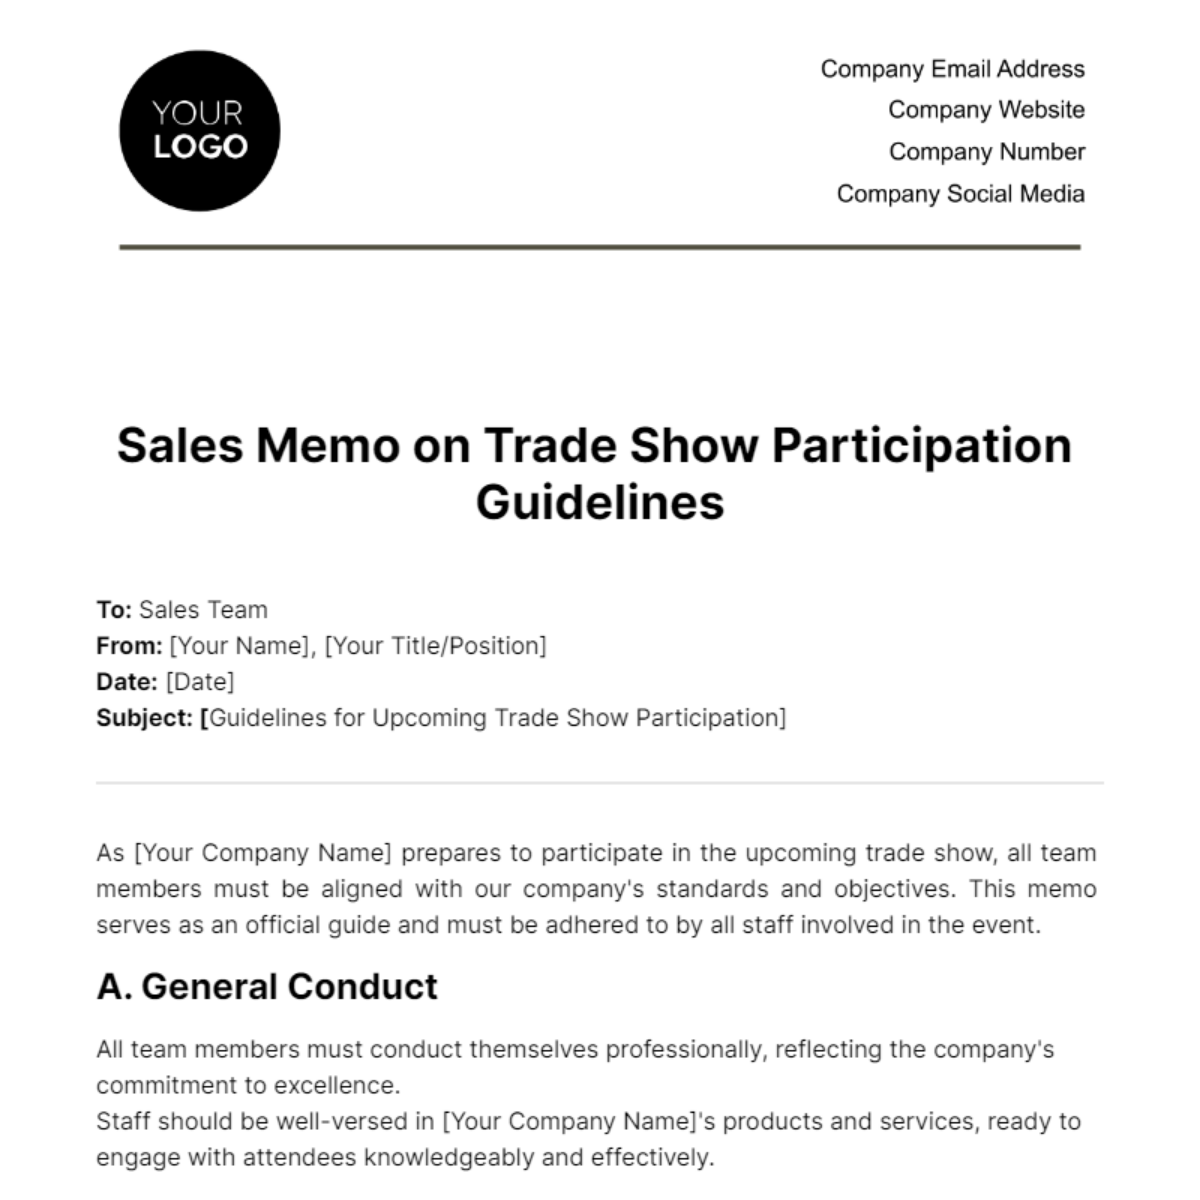 Sales Memo on Trade Show Participation Guidelines Template